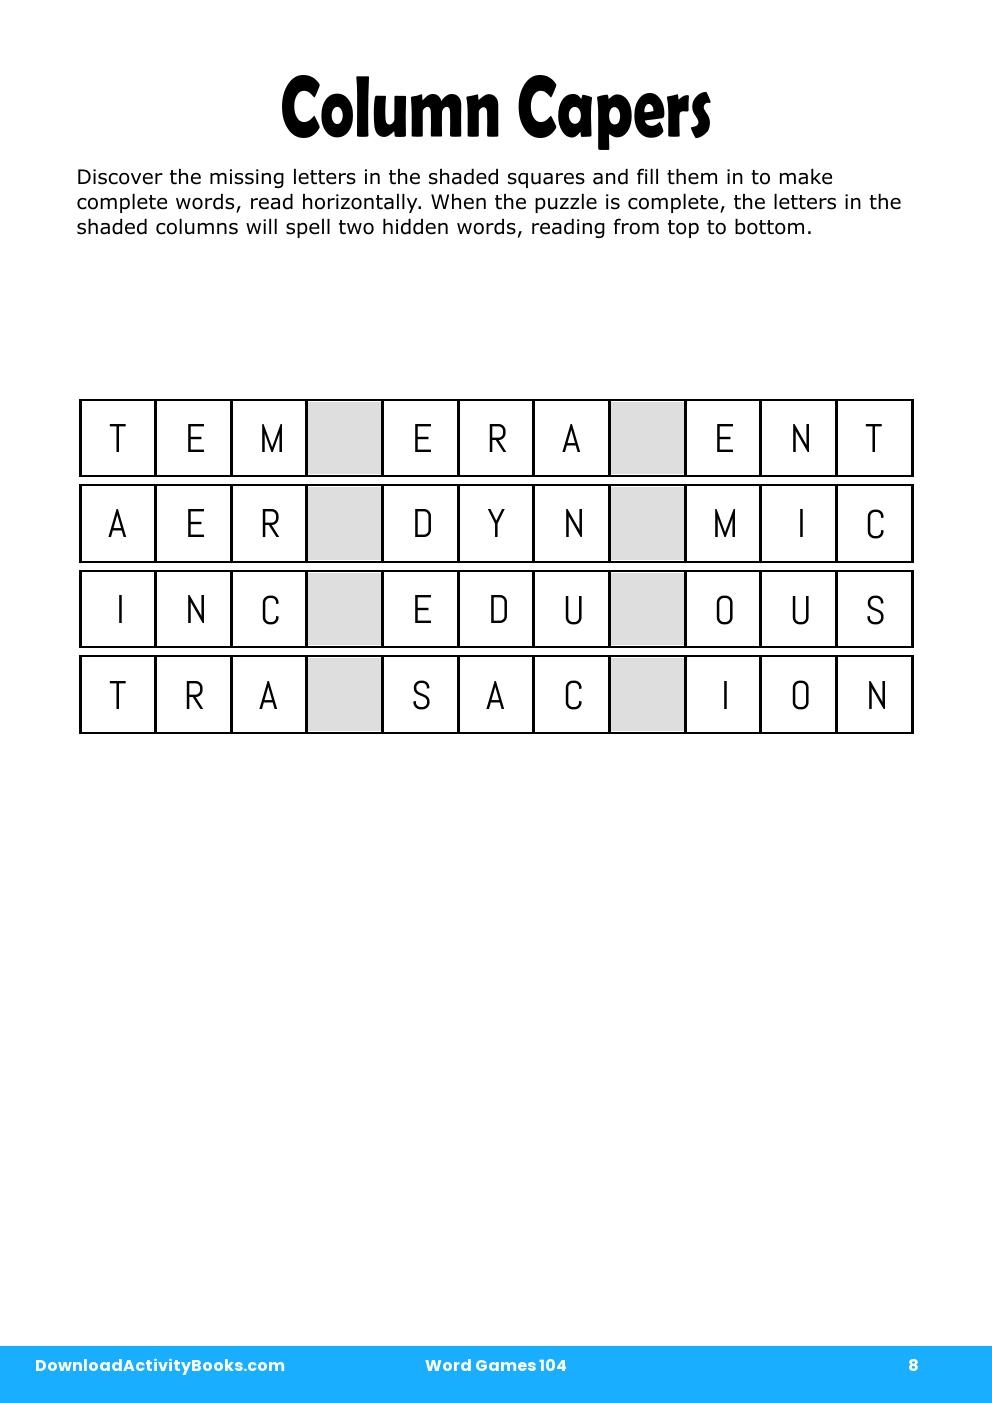 Column Capers in Word Games 104